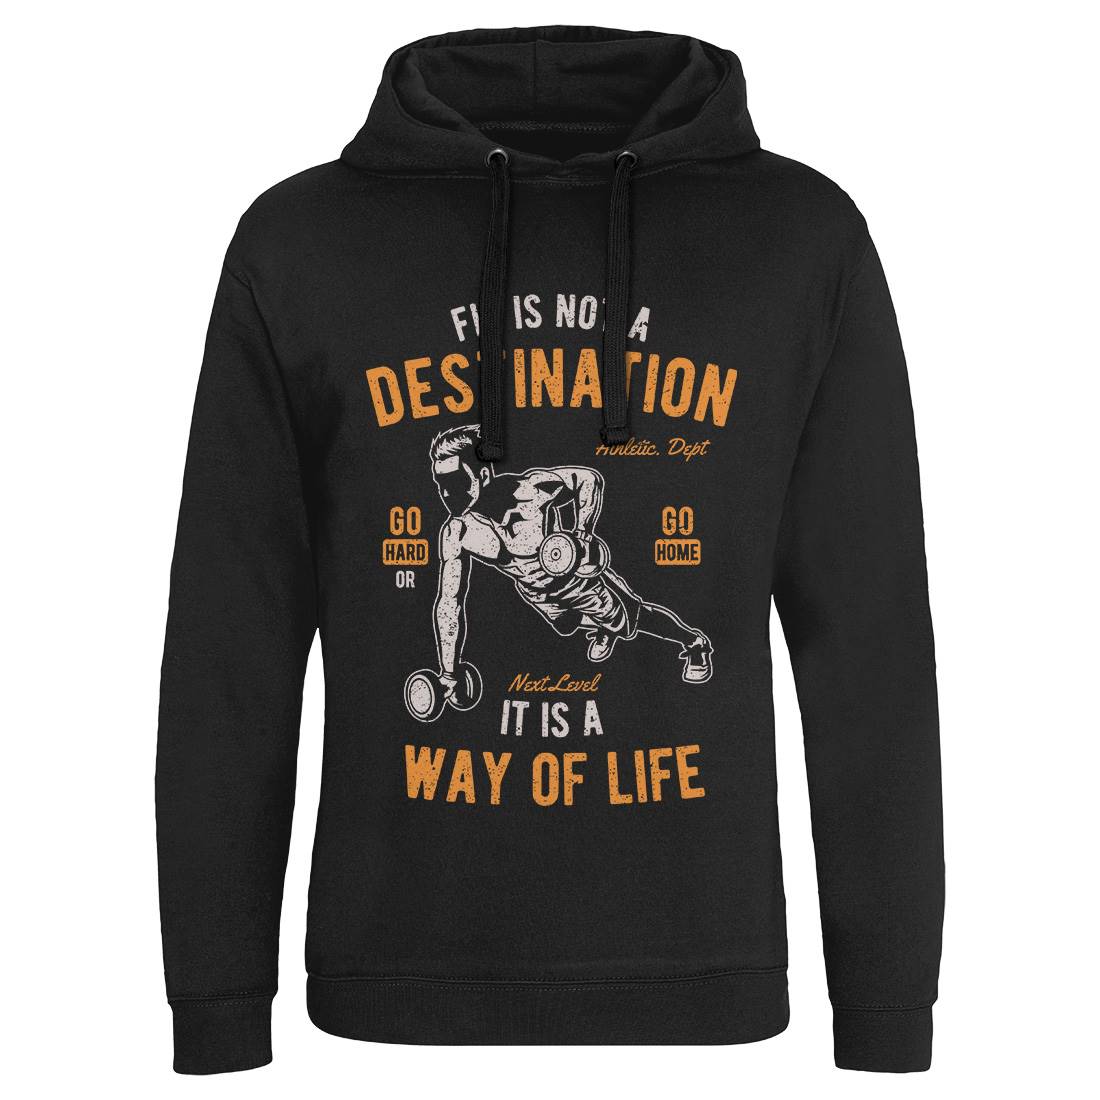 Fit Is Not A Destination Mens Hoodie Without Pocket Gym A663